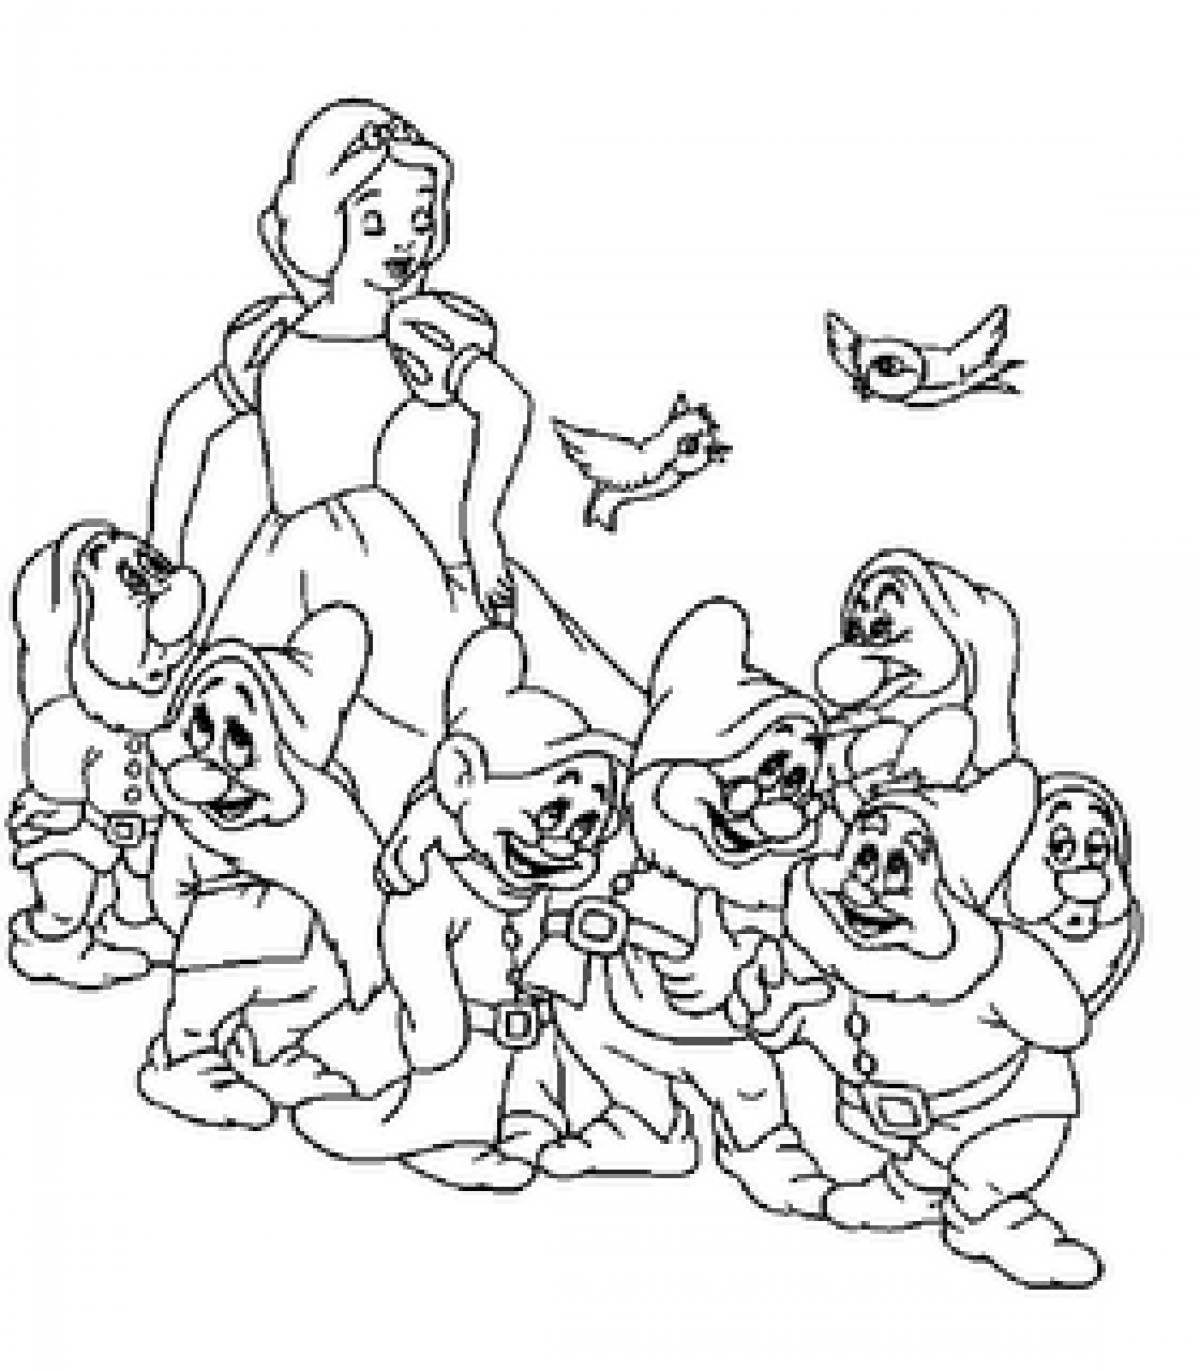 Snow White and the Dwarves